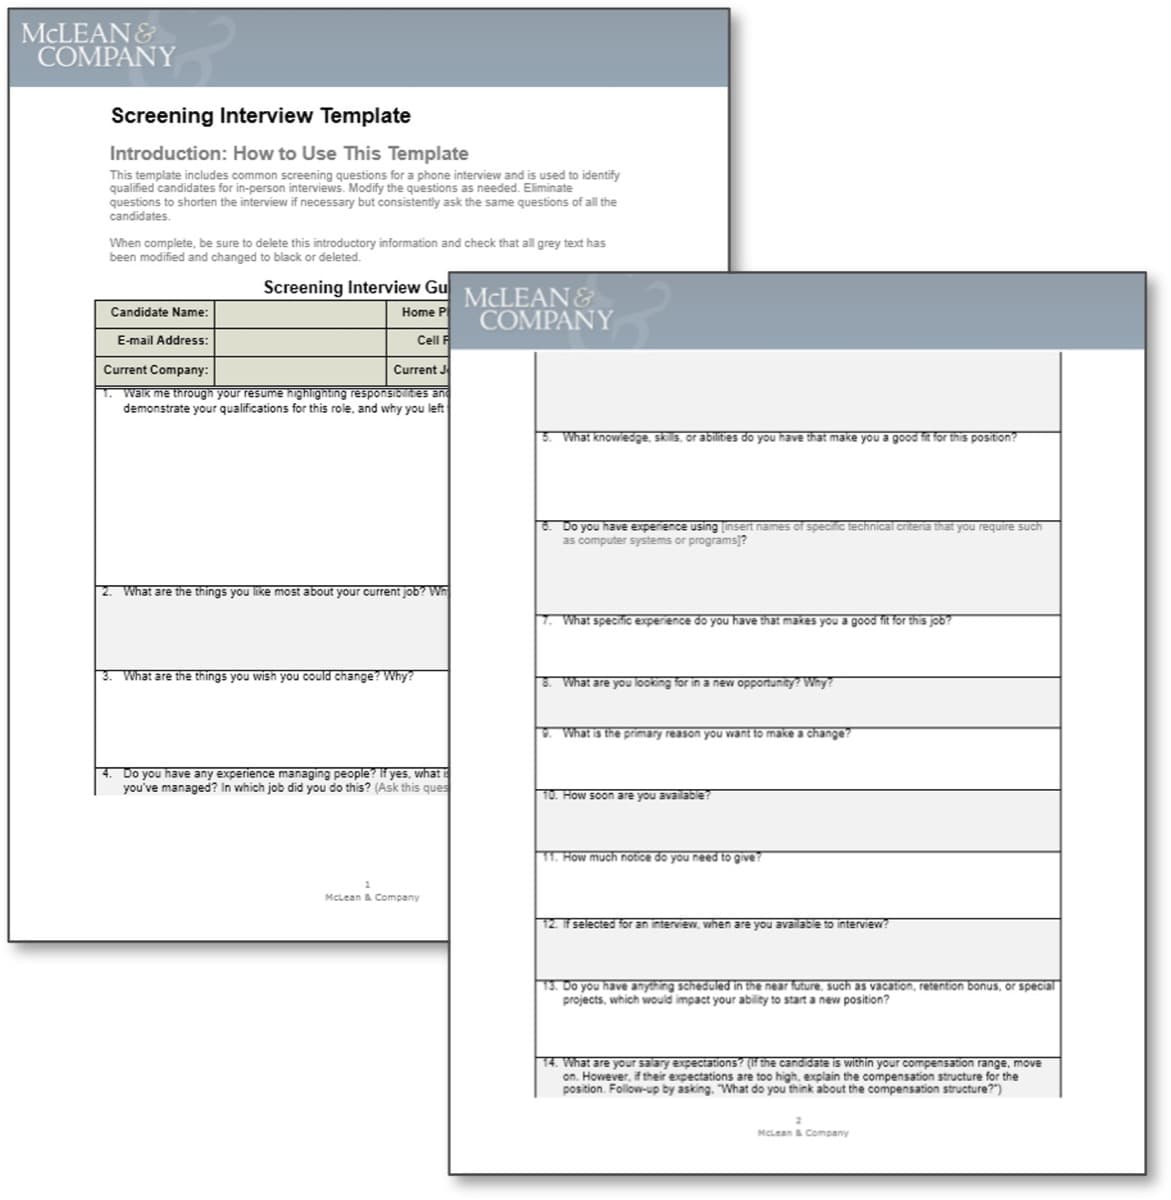 The image contains screenshots of the Screening Interview Template.